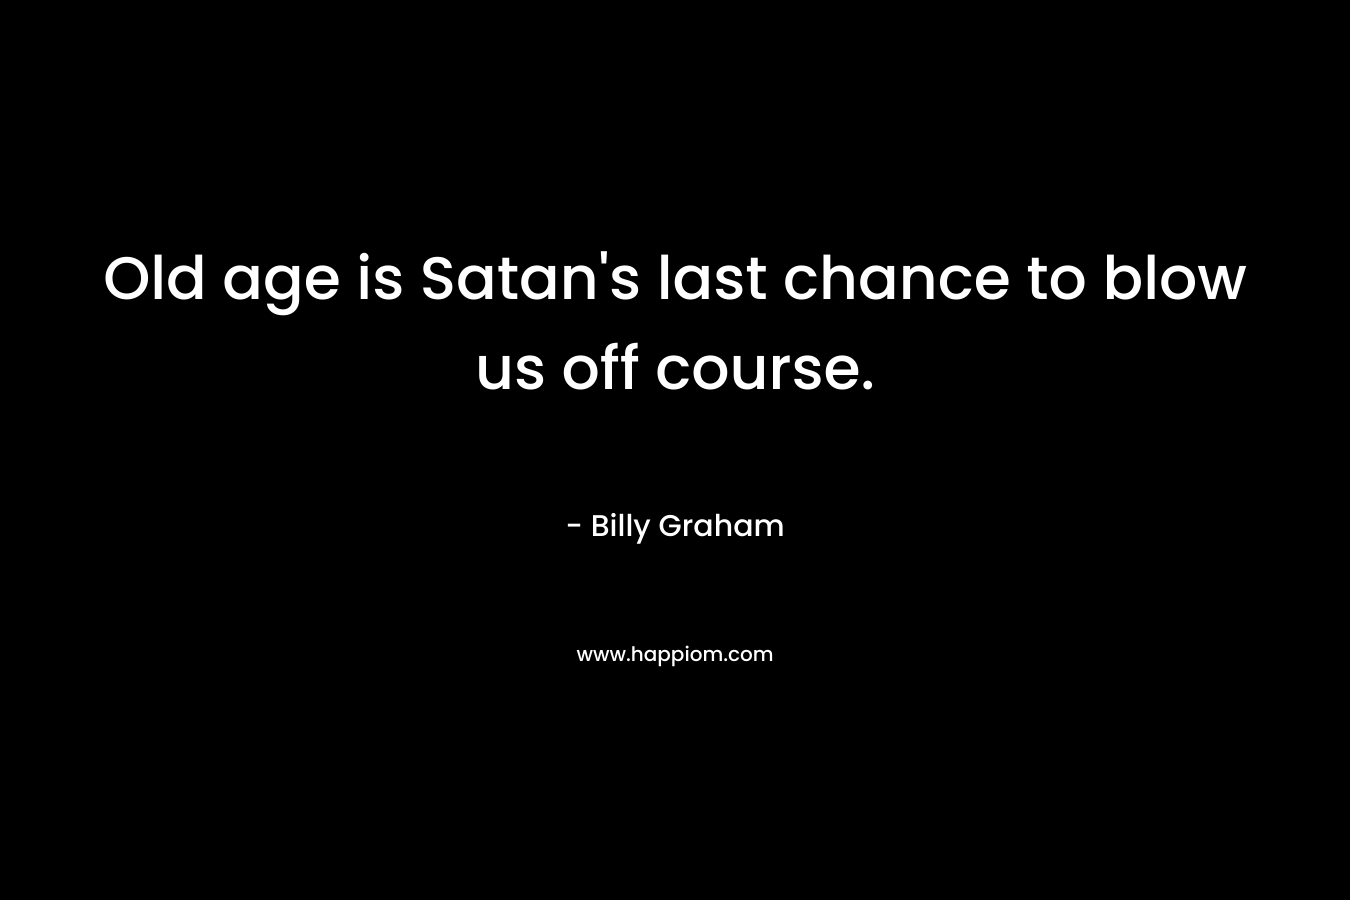 Old age is Satan's last chance to blow us off course.